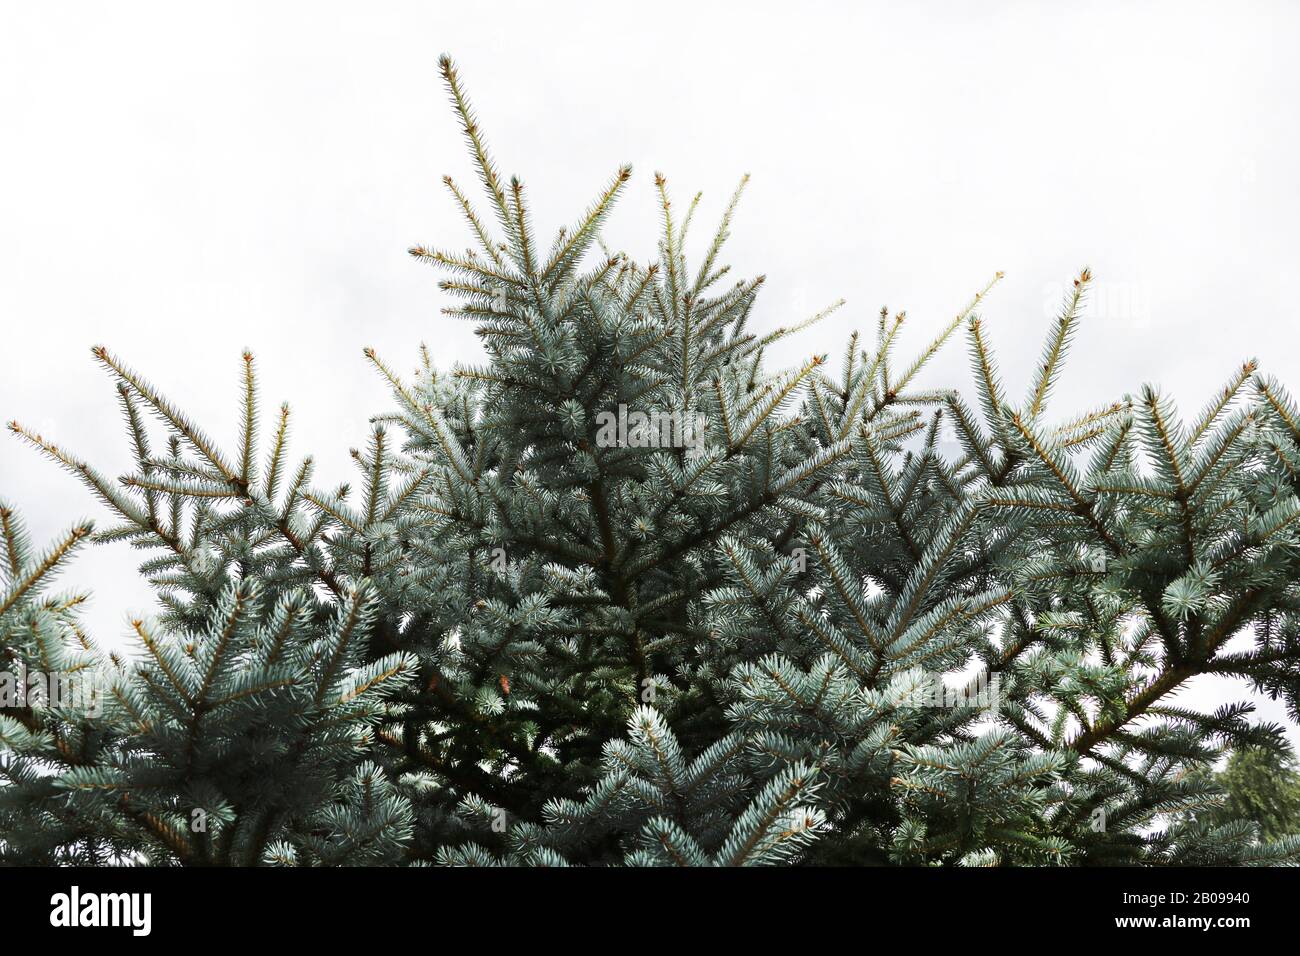 green prickly branches of a fur-tree or pine Stock Photo